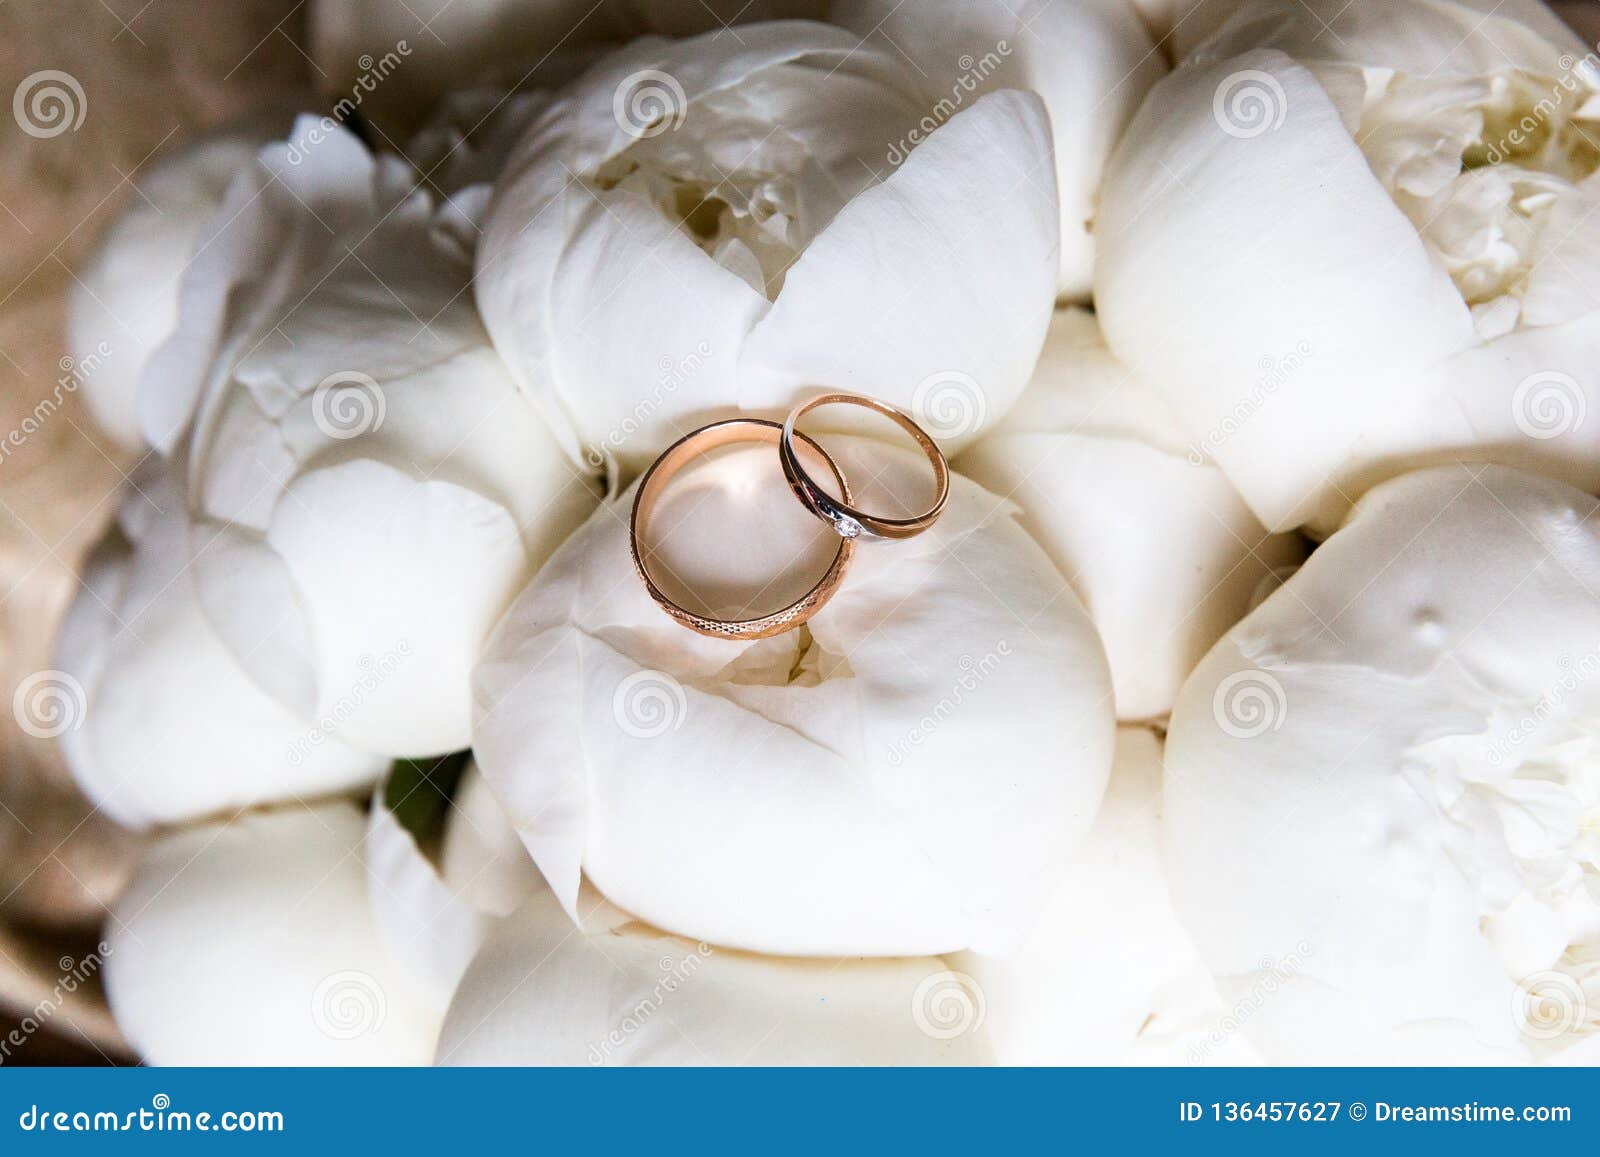 Wedding Rings on a Bouquet of Flowers Stock Image - Image of newlywed ...